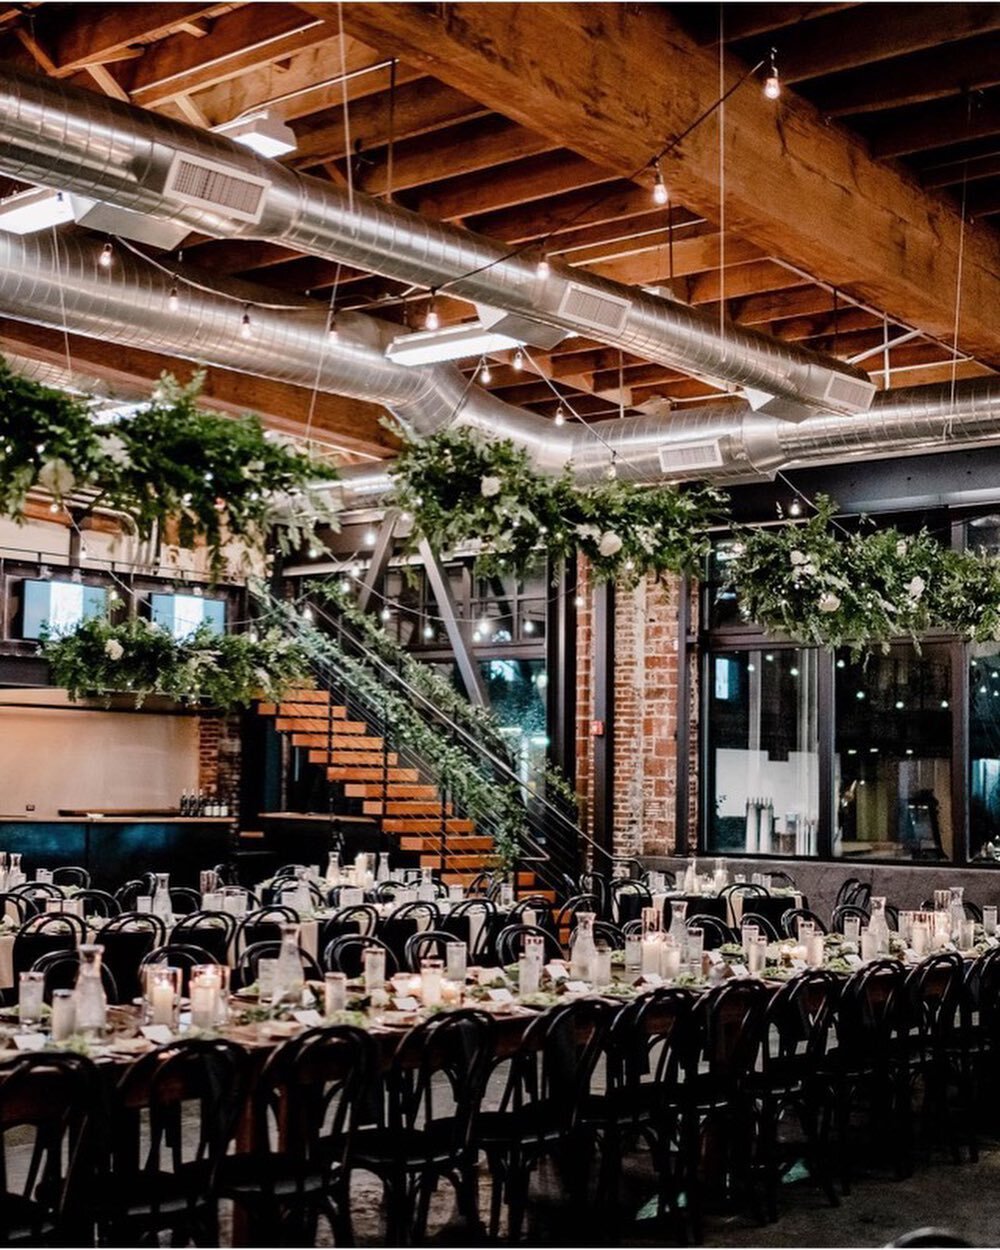 Floral magic from @mimosafloralco
&bull;
One of our biggest undertakings to date! The massive ceiling height &amp; precision of hanging these rows in a perfect line were the two challenges. I love designing pretty bouquets, but large scale installati